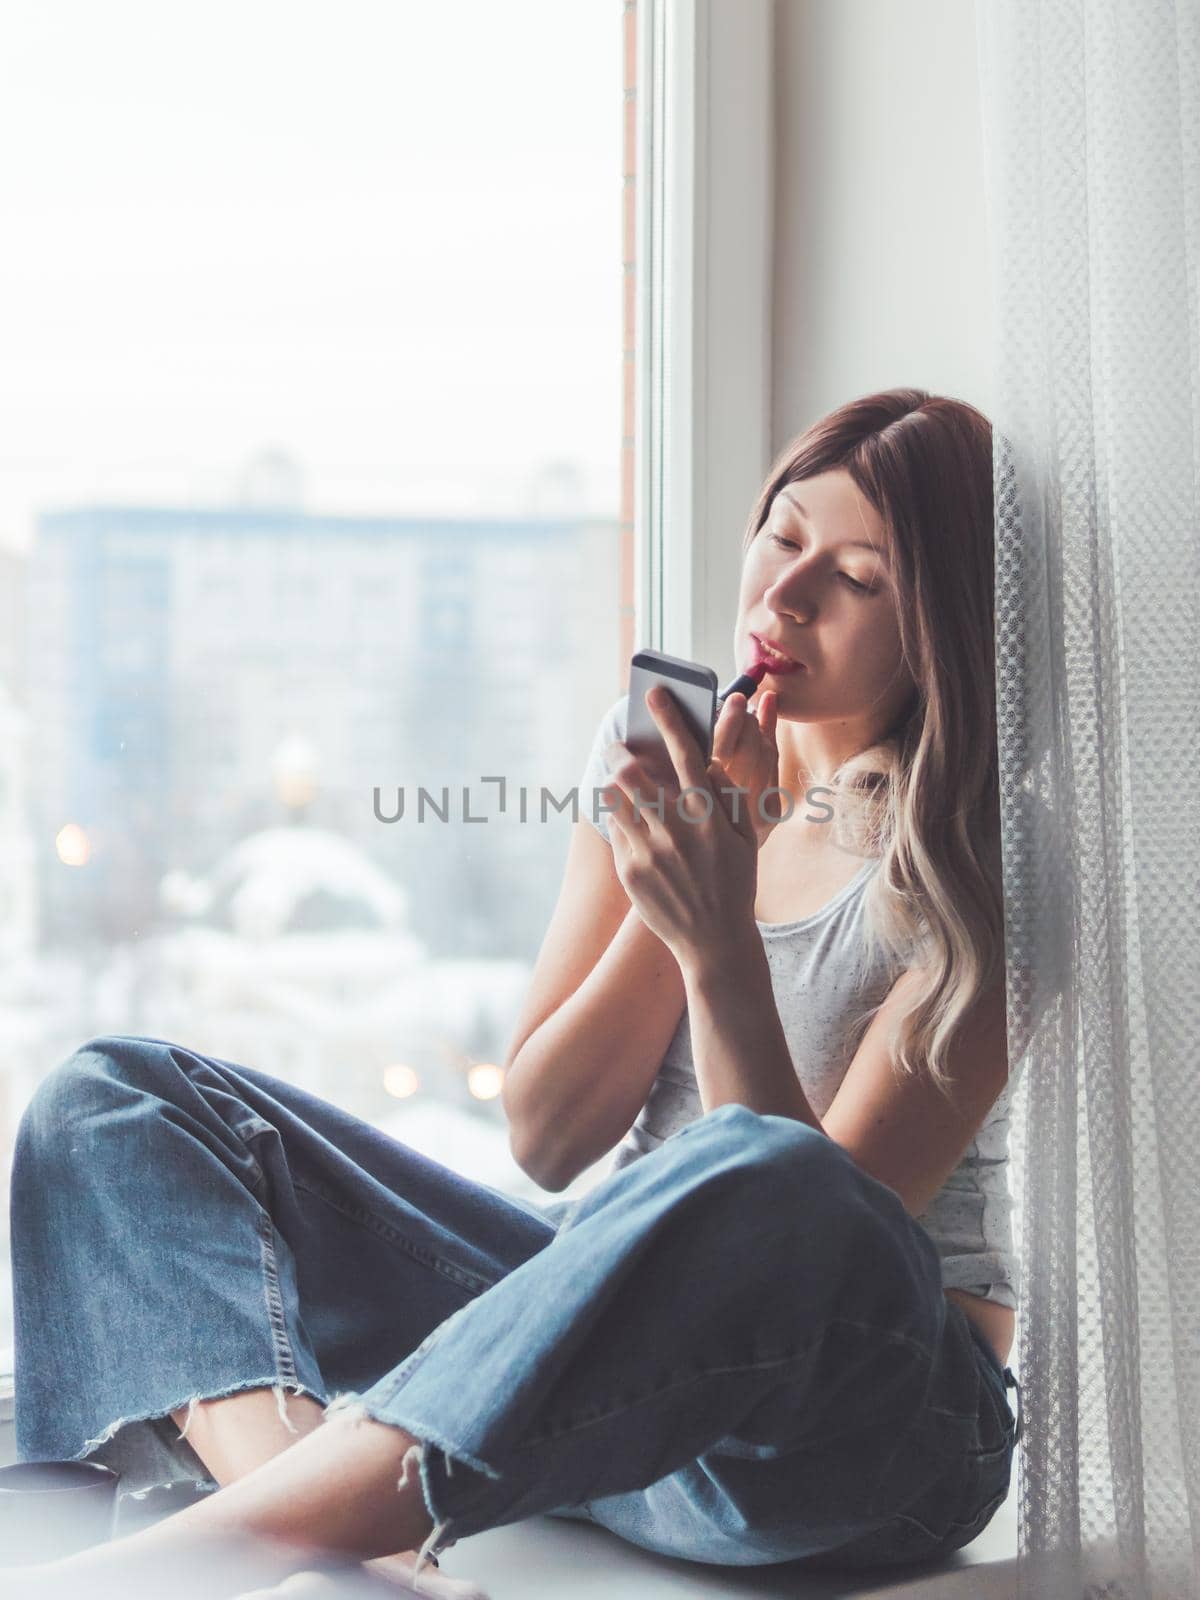 Woman with curly hair paints her lips with lipstick and uses smartphone as mirror. Fast make-up. Morning routine. Cup of hot coffee on windowsill.